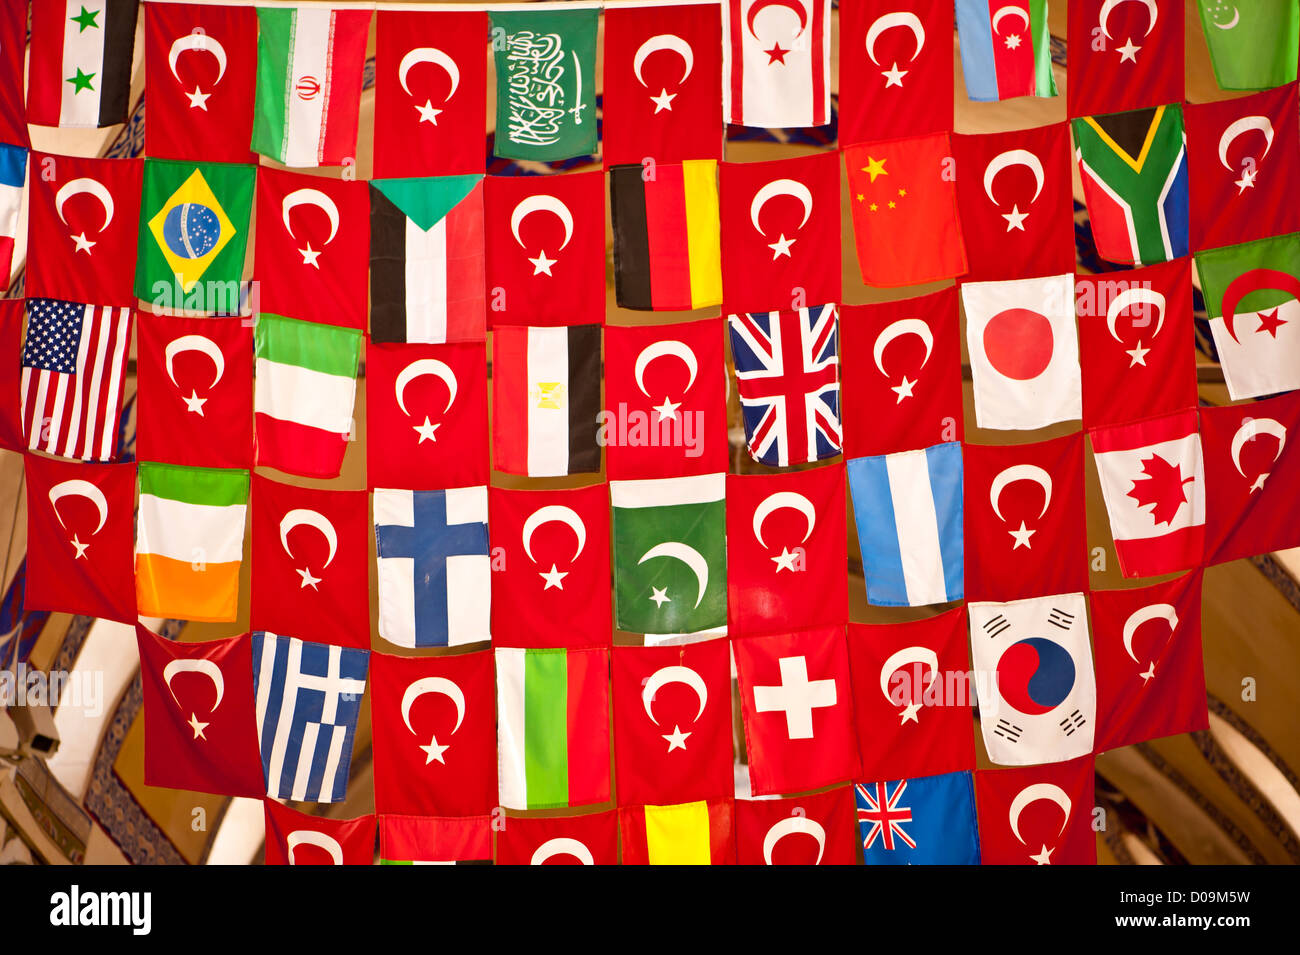 A display of many countries' flags in the Grand Bazaar, Istanbul. Stock Photo